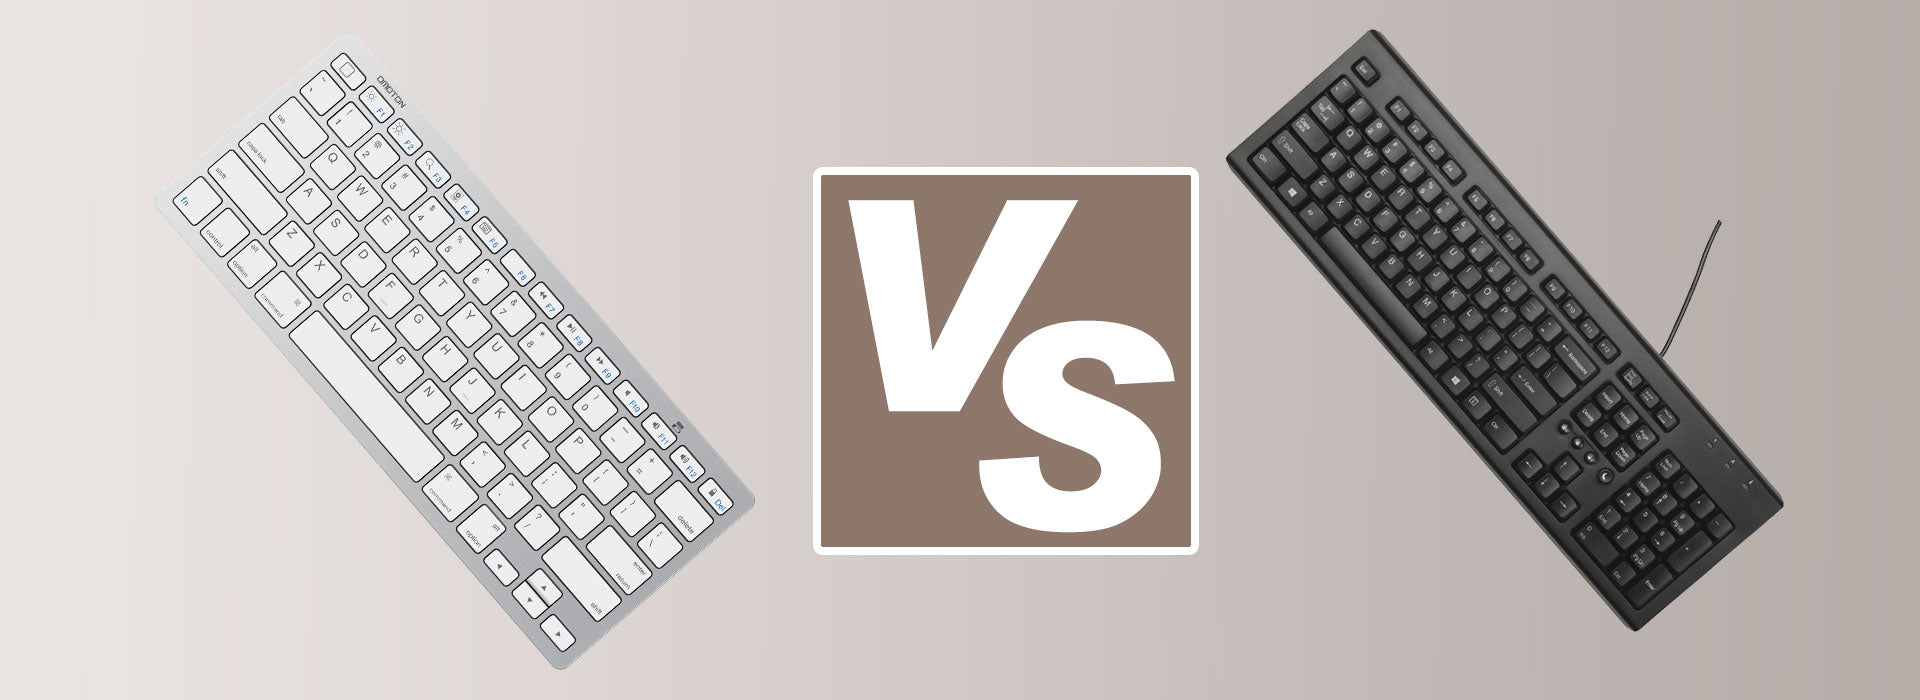 Wireless Keyboard vs. Wired Keyboard: Which One Is Right for You?